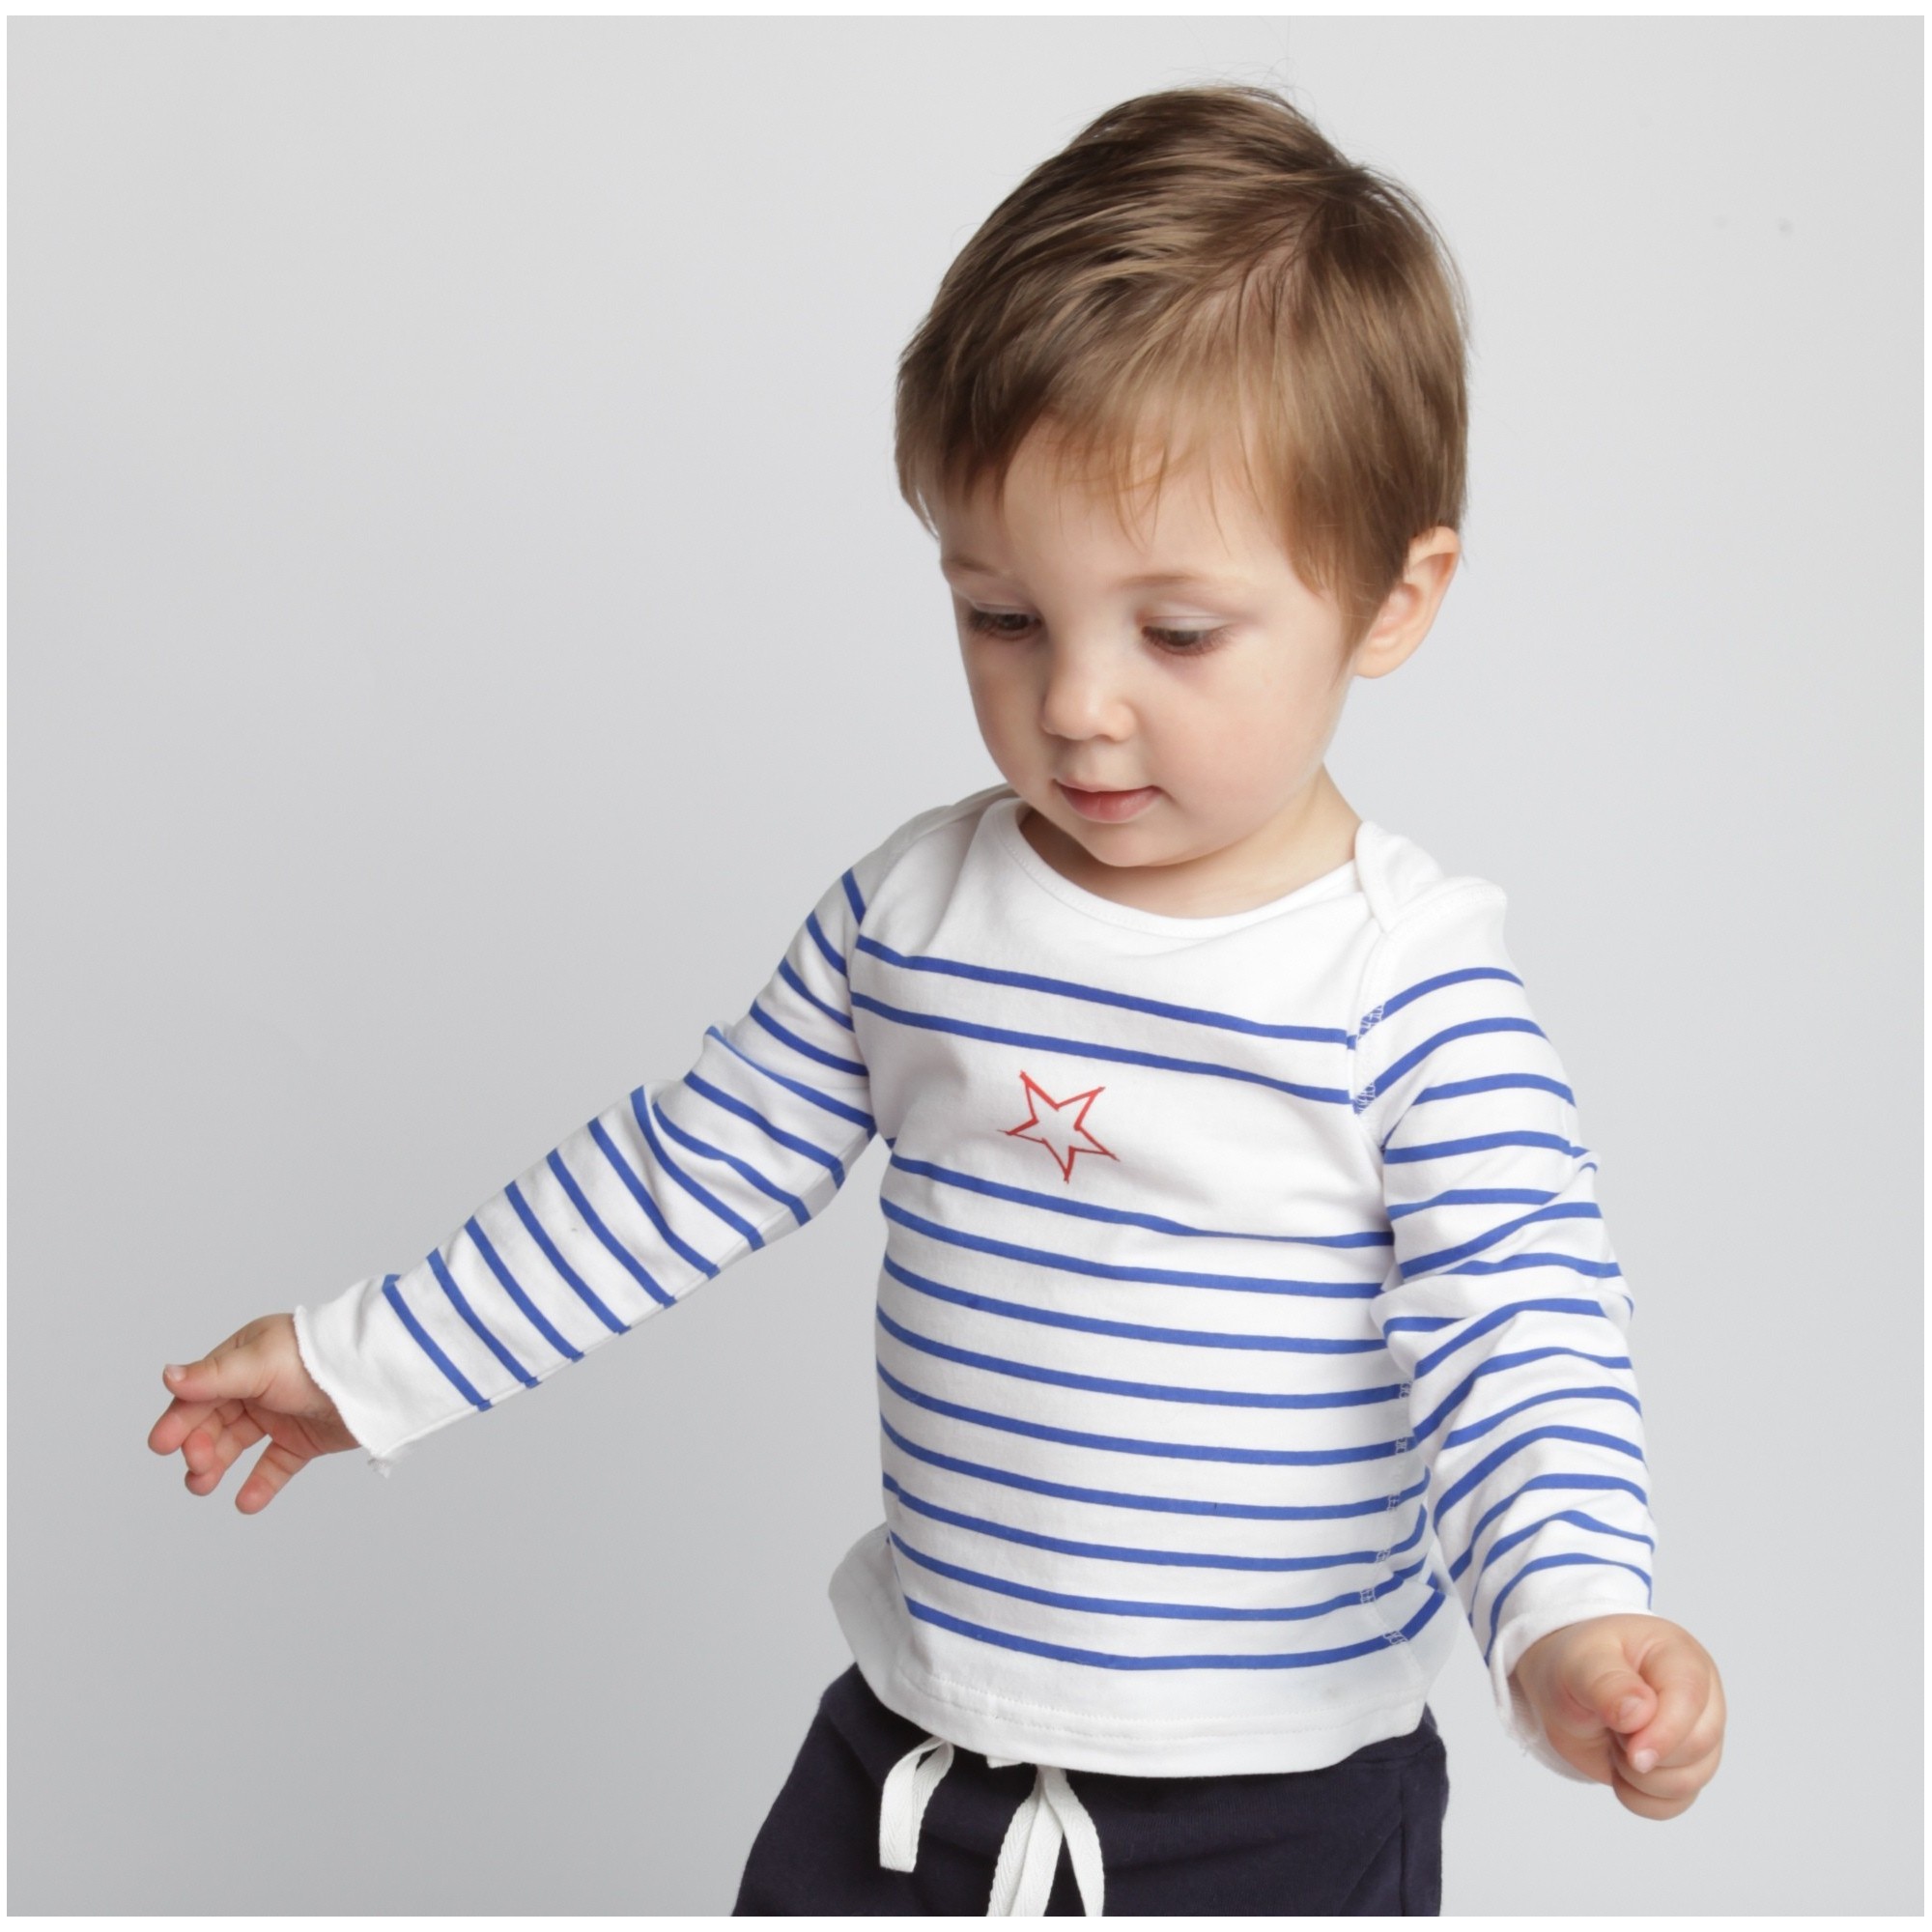 Cotton collection - Baby / children's blue striped T-Shirt with red